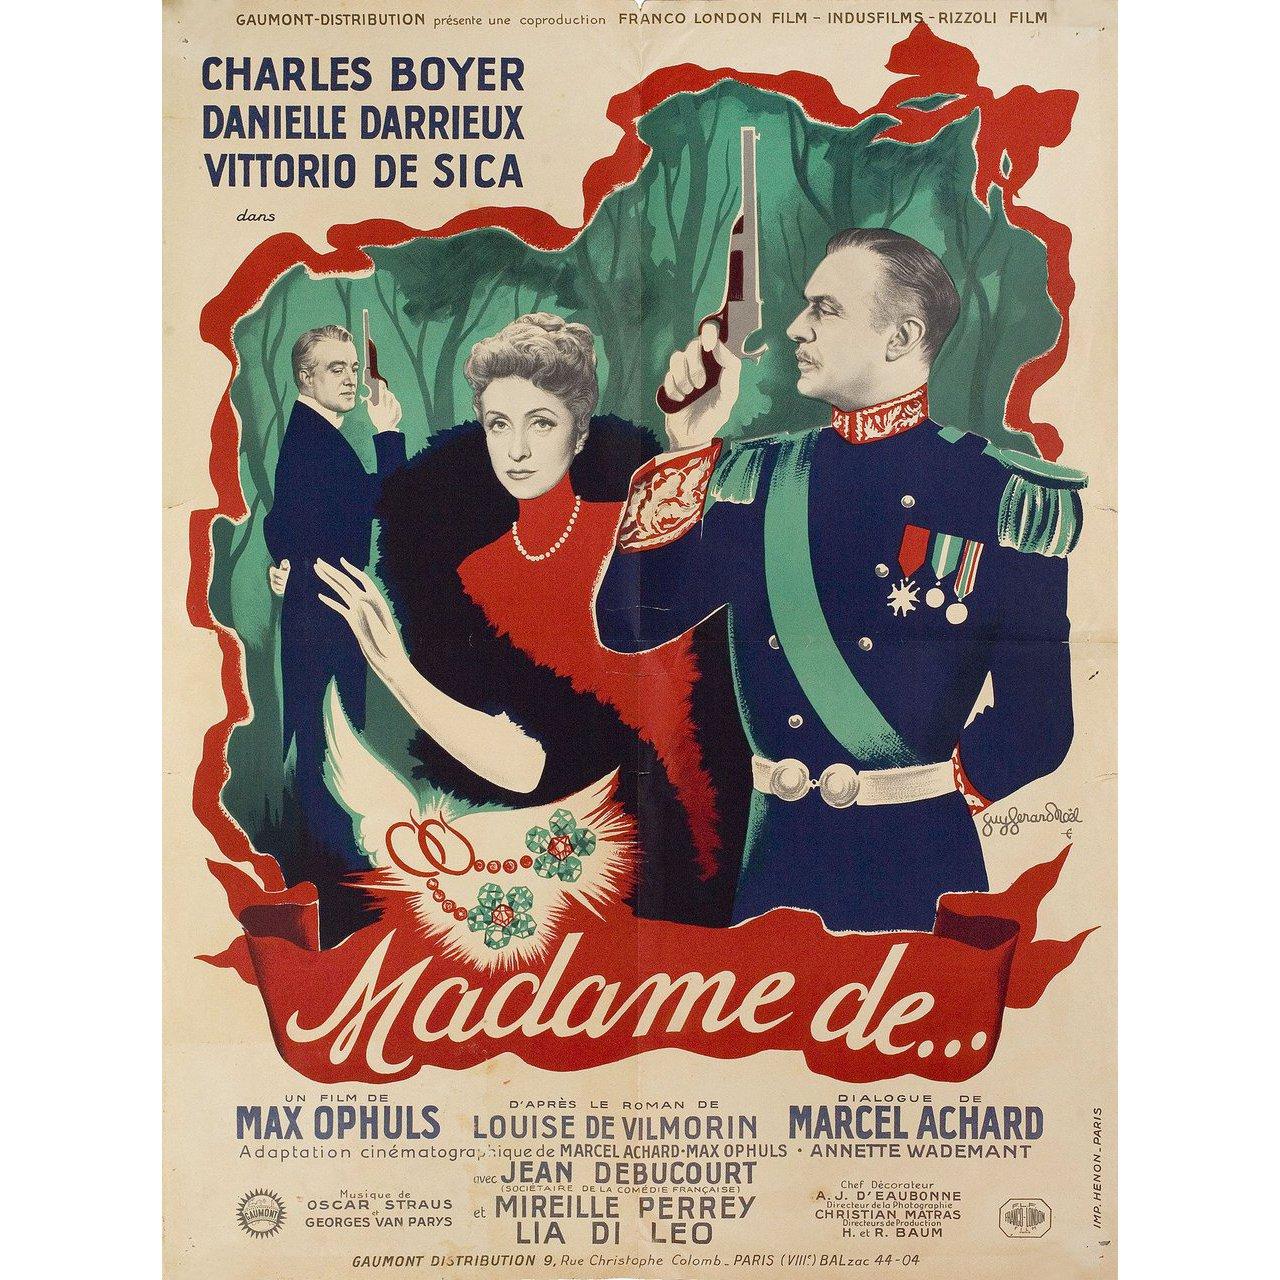 Original 1953 French moyenne poster by Guy Gerard Noel for. Very good fine condition, folded. Many original posters were issued folded or were subsequently folded. Please note: the size is stated in inches and the actual size can vary by an inch or